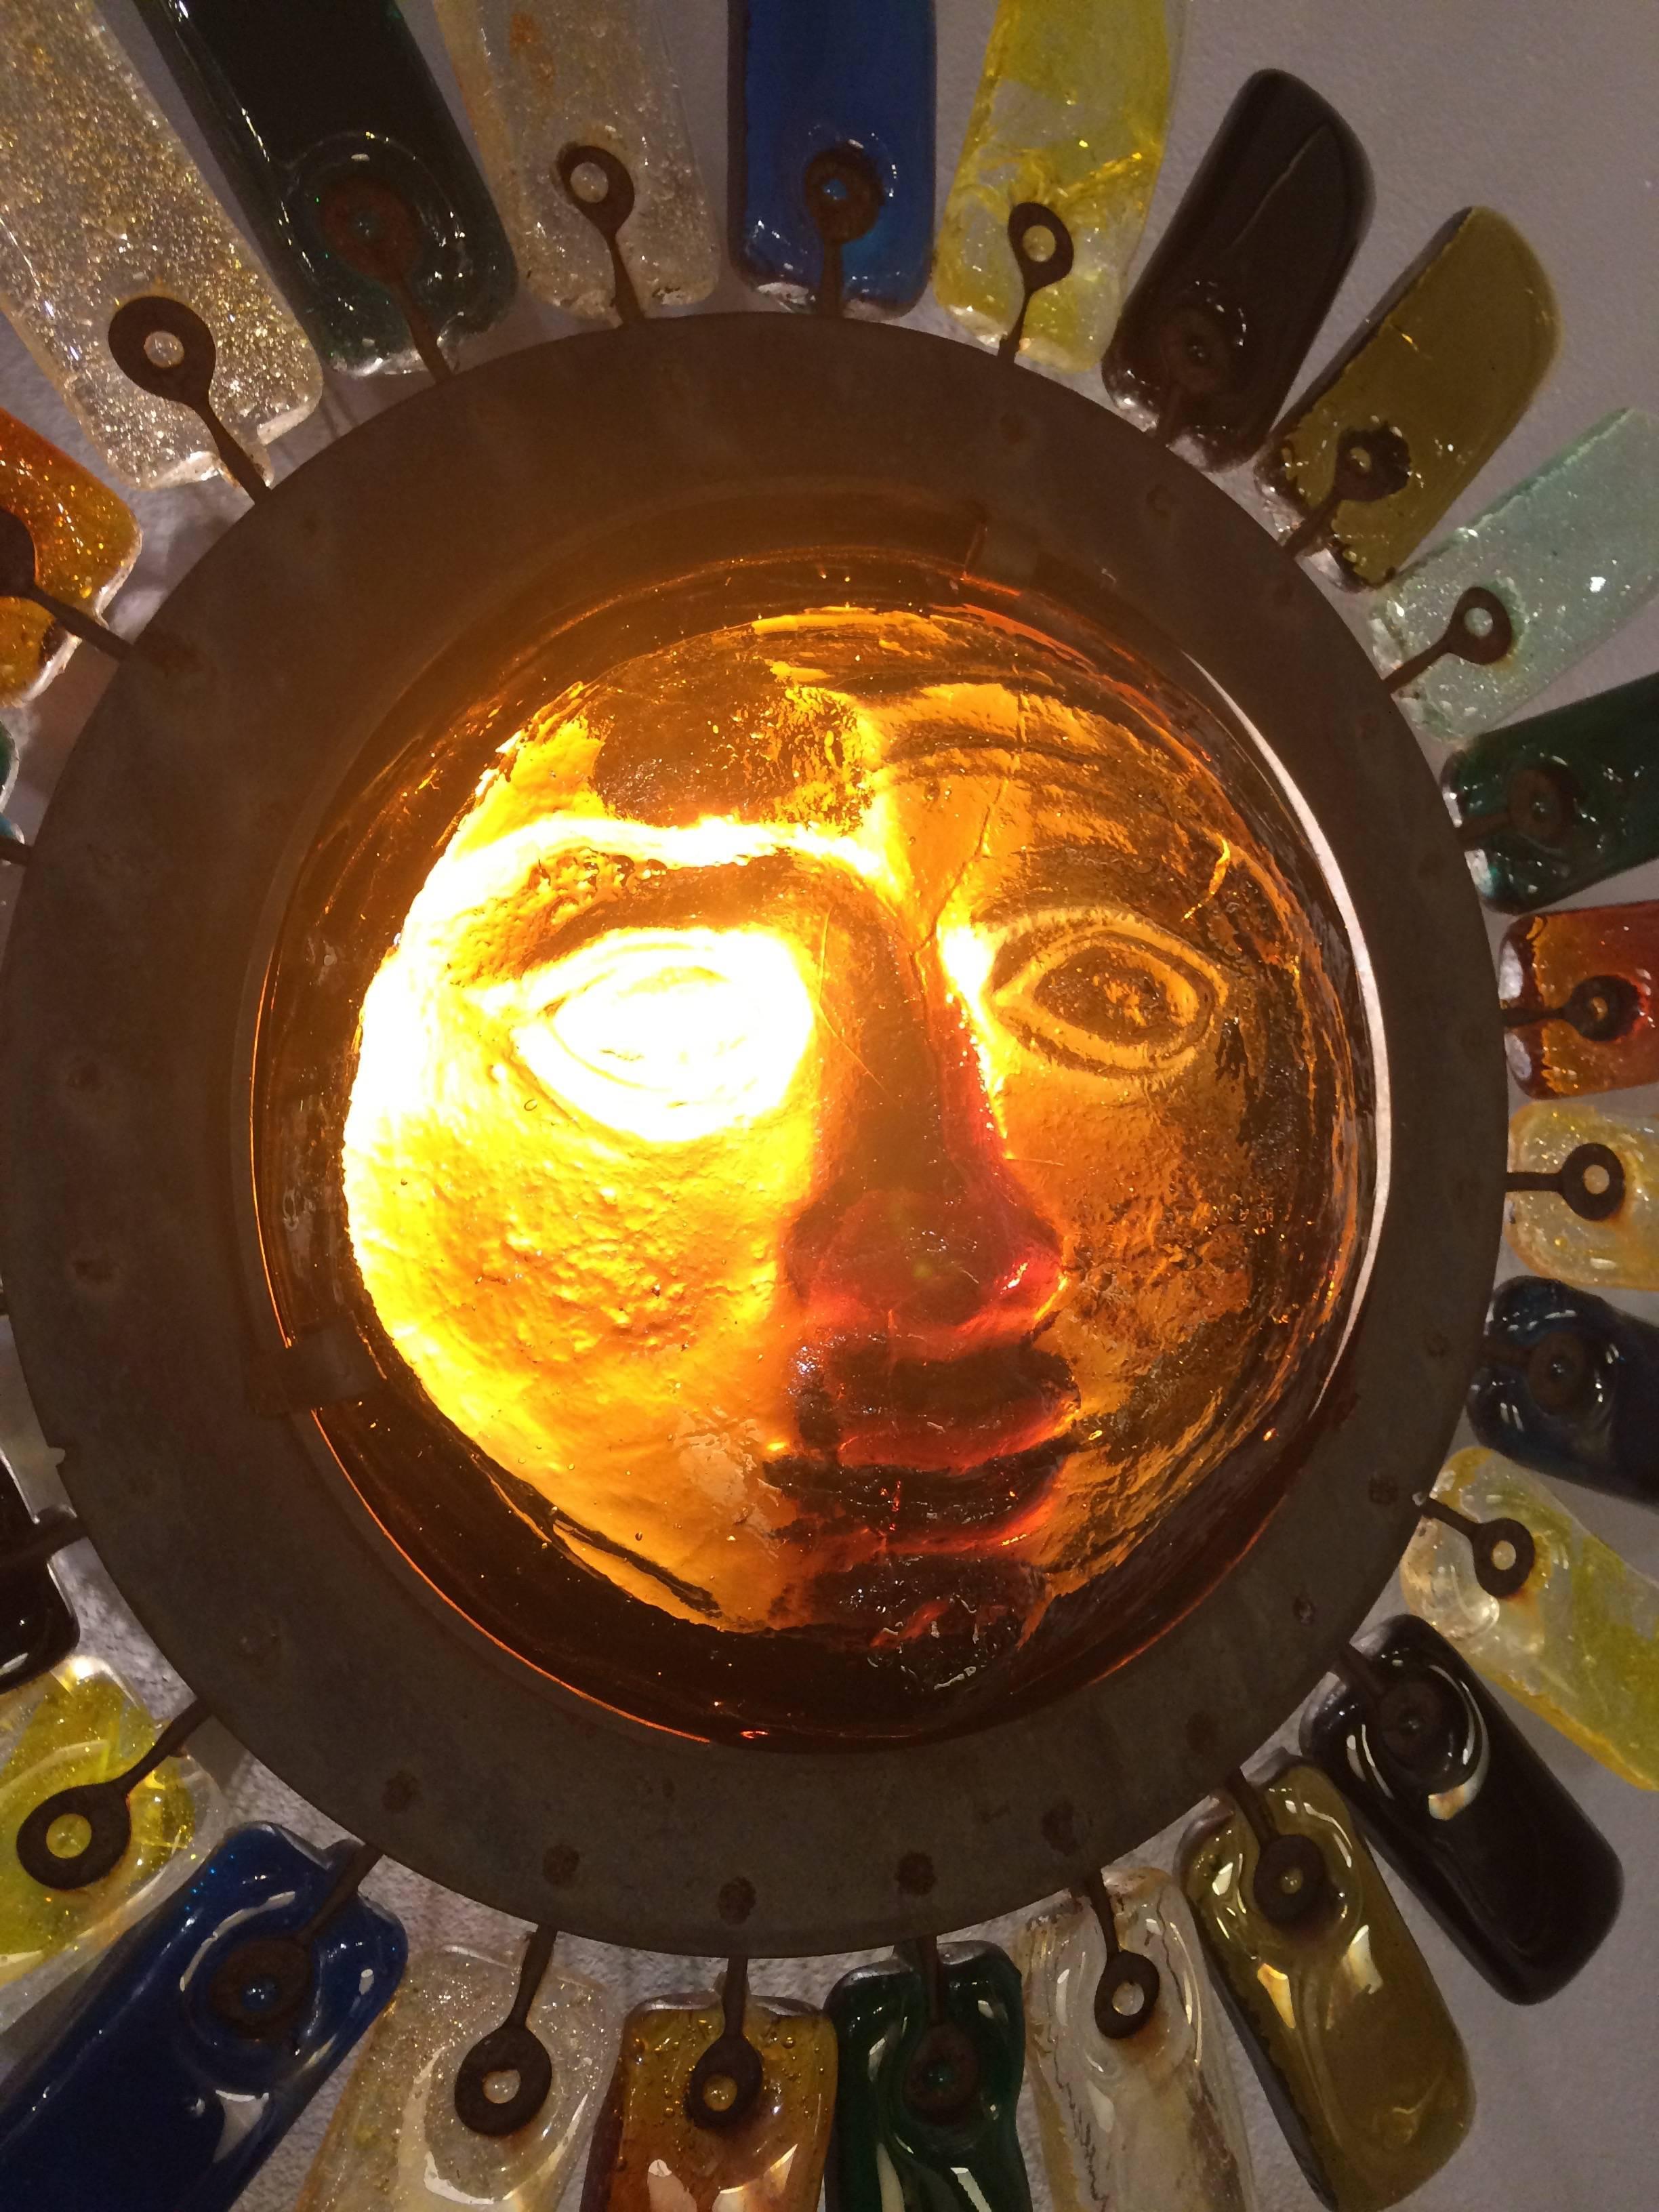 One of a kind handmade wall sculpture or sconce in the shape of a sun with a face that illuminates and multi colored glass 